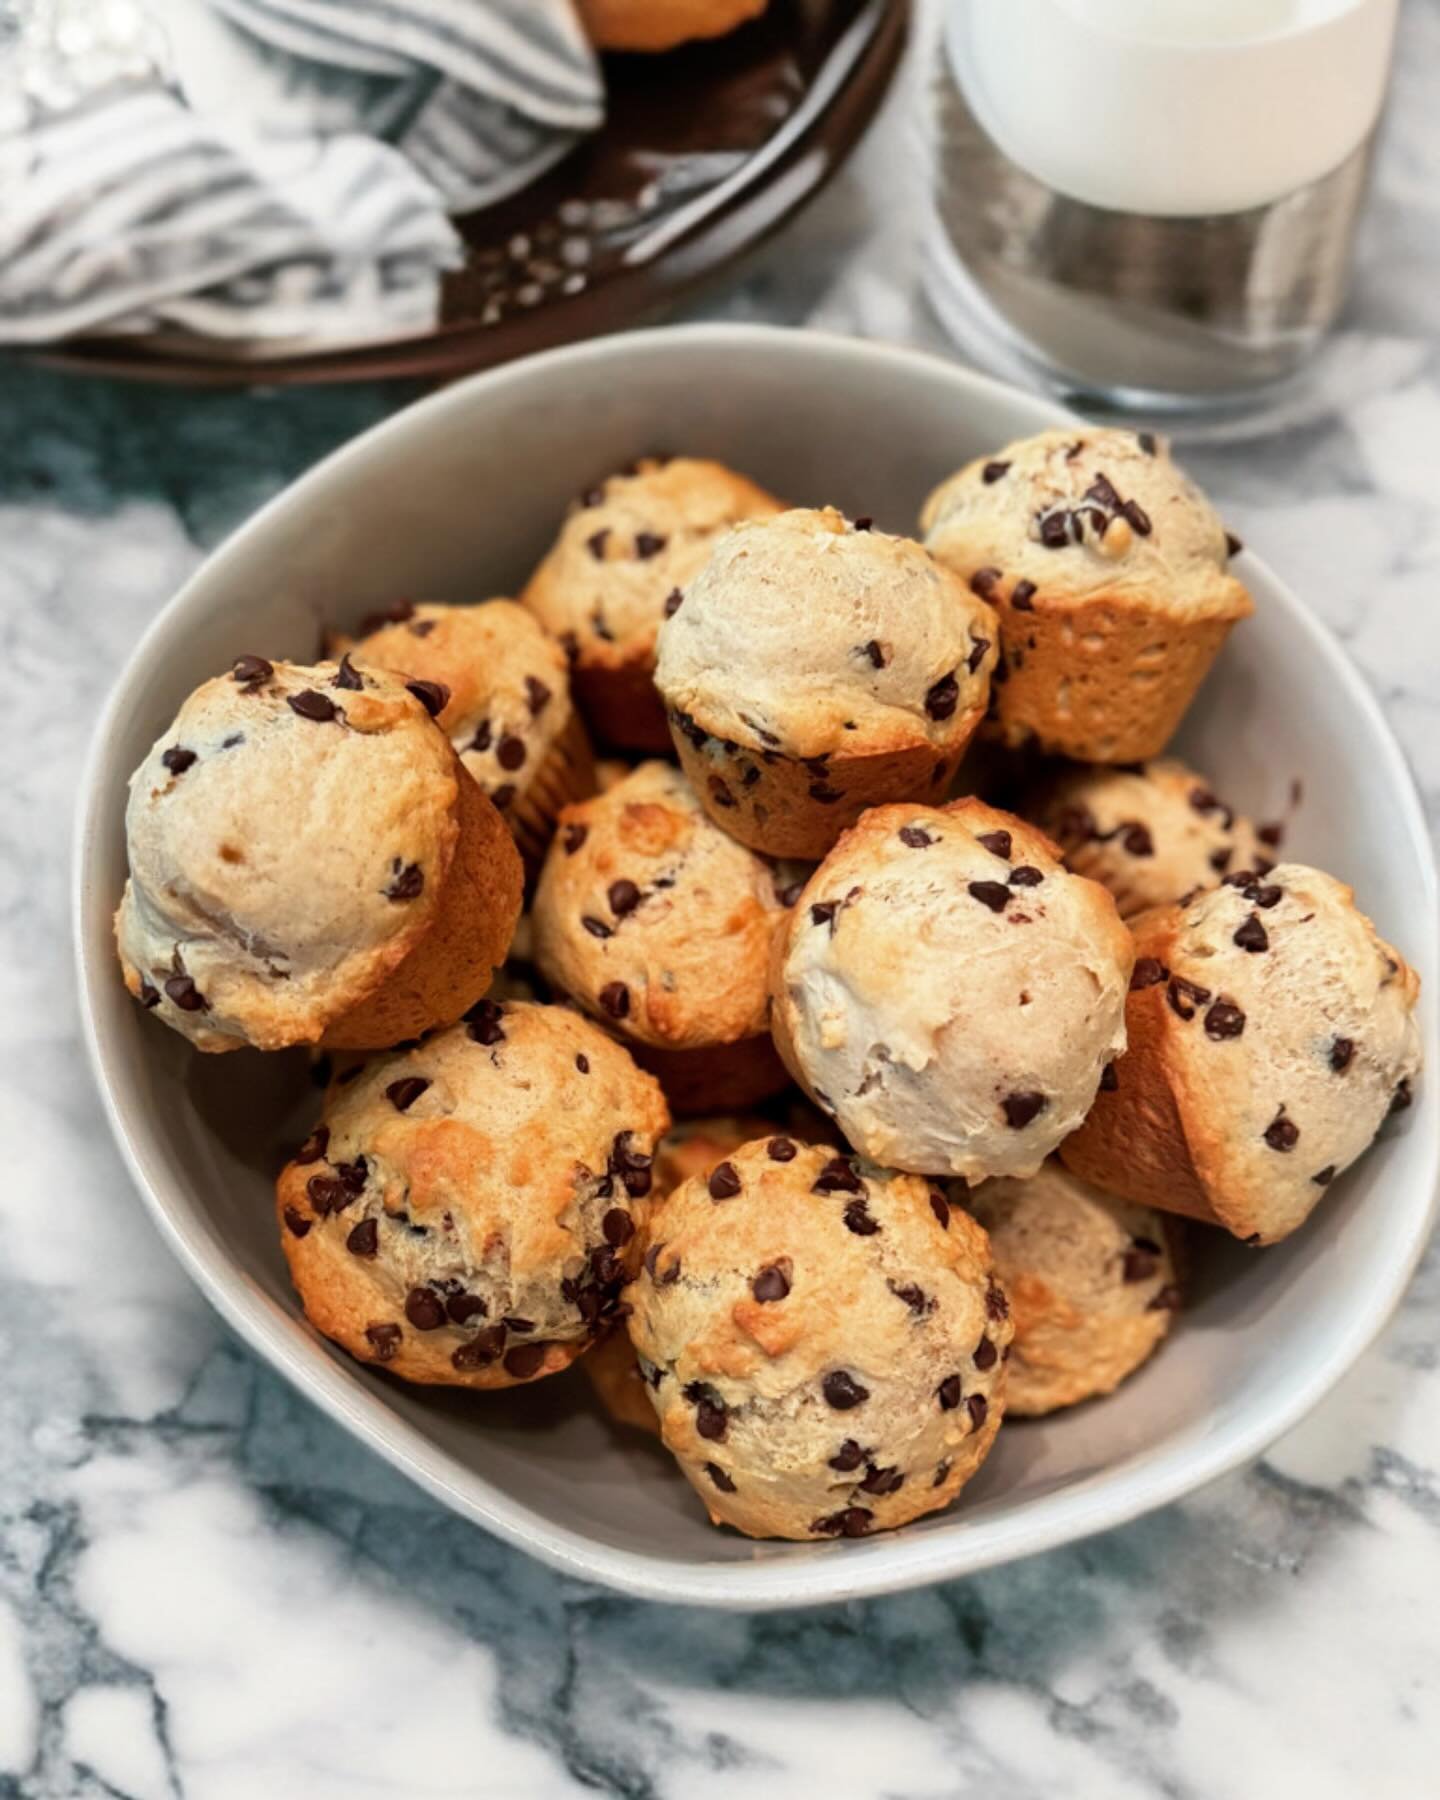 Anyone else add double the chocolate chips in their chocolate chip muffin recipe? I love when you get that silky chocolatey goodness in each bite!
*
*
*
#chocolate #chocolatechip #chocolatechipmuffins #muffins #sunday #sundaymornings #baking